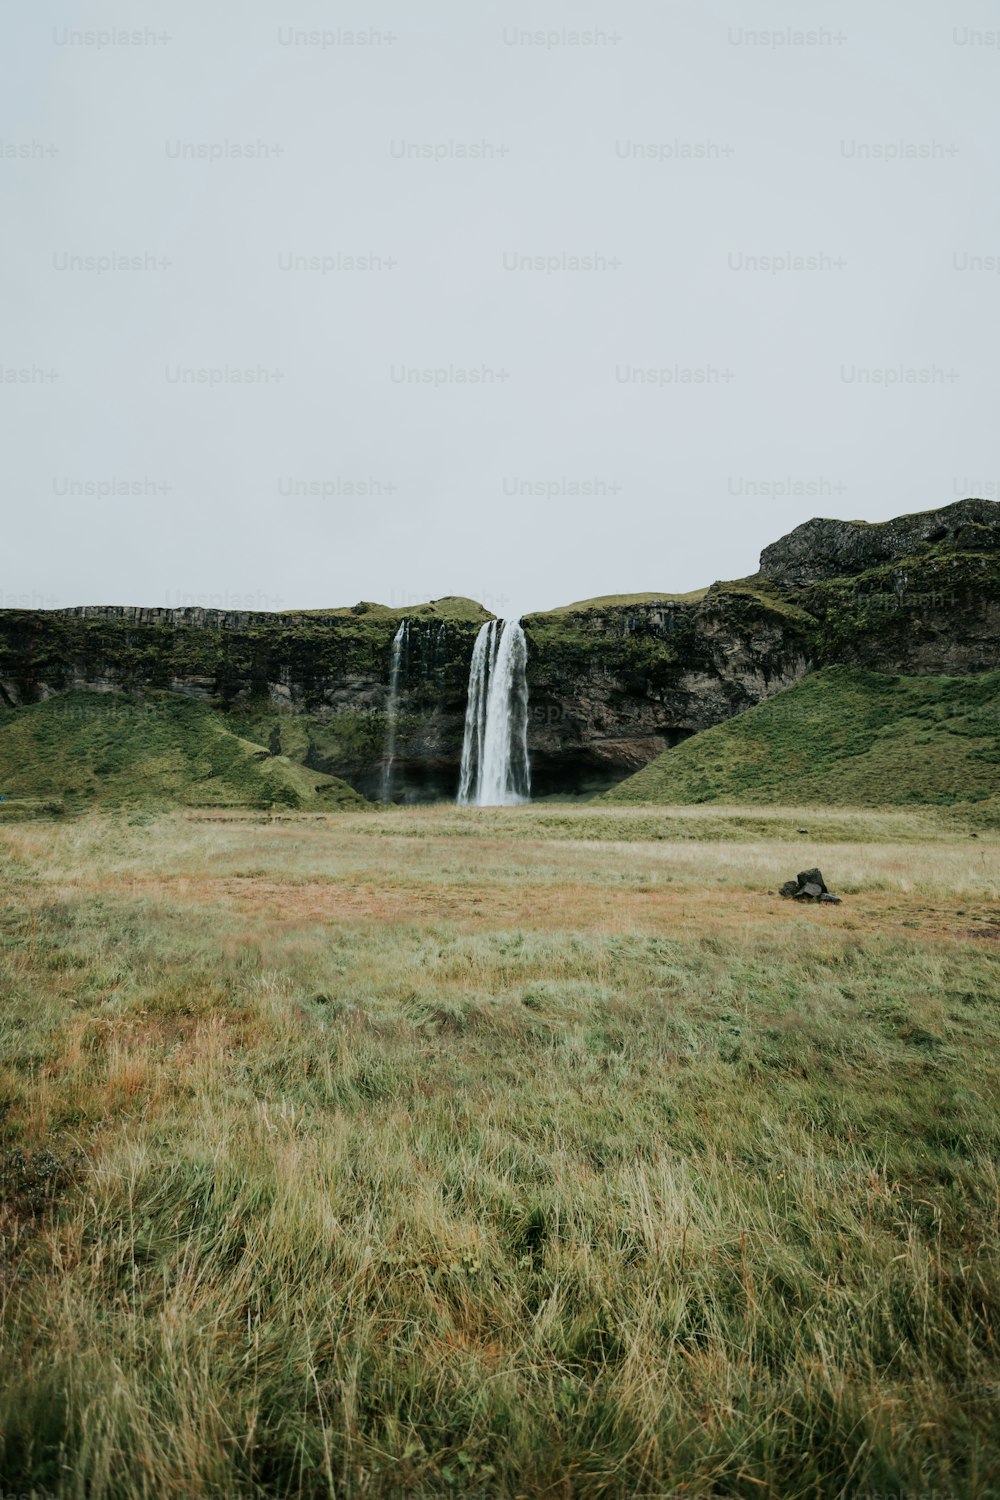 a waterfall in the middle of a grassy field